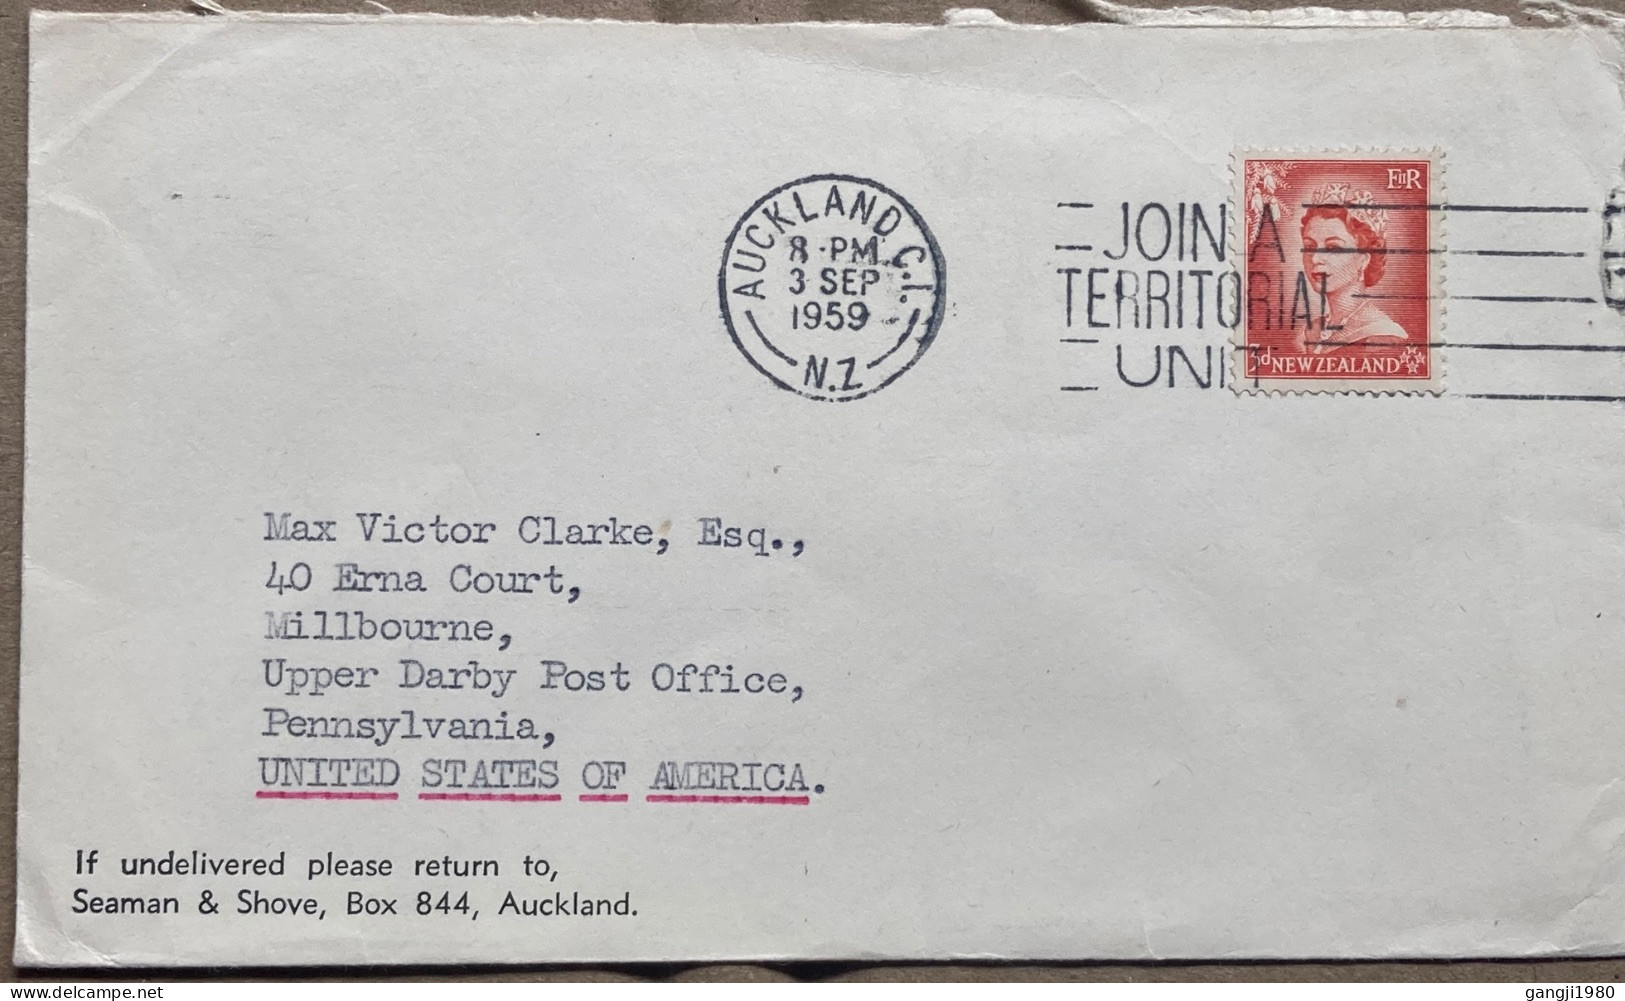 NEW ZEALAND 1959, COVER USED TO USA, FIRM SEAMAN & SHOVE, AUCKLAND CITY SLOGAN CANCEL, JOIN A TERRITORIAL UNIT, QUEEN ST - Briefe U. Dokumente